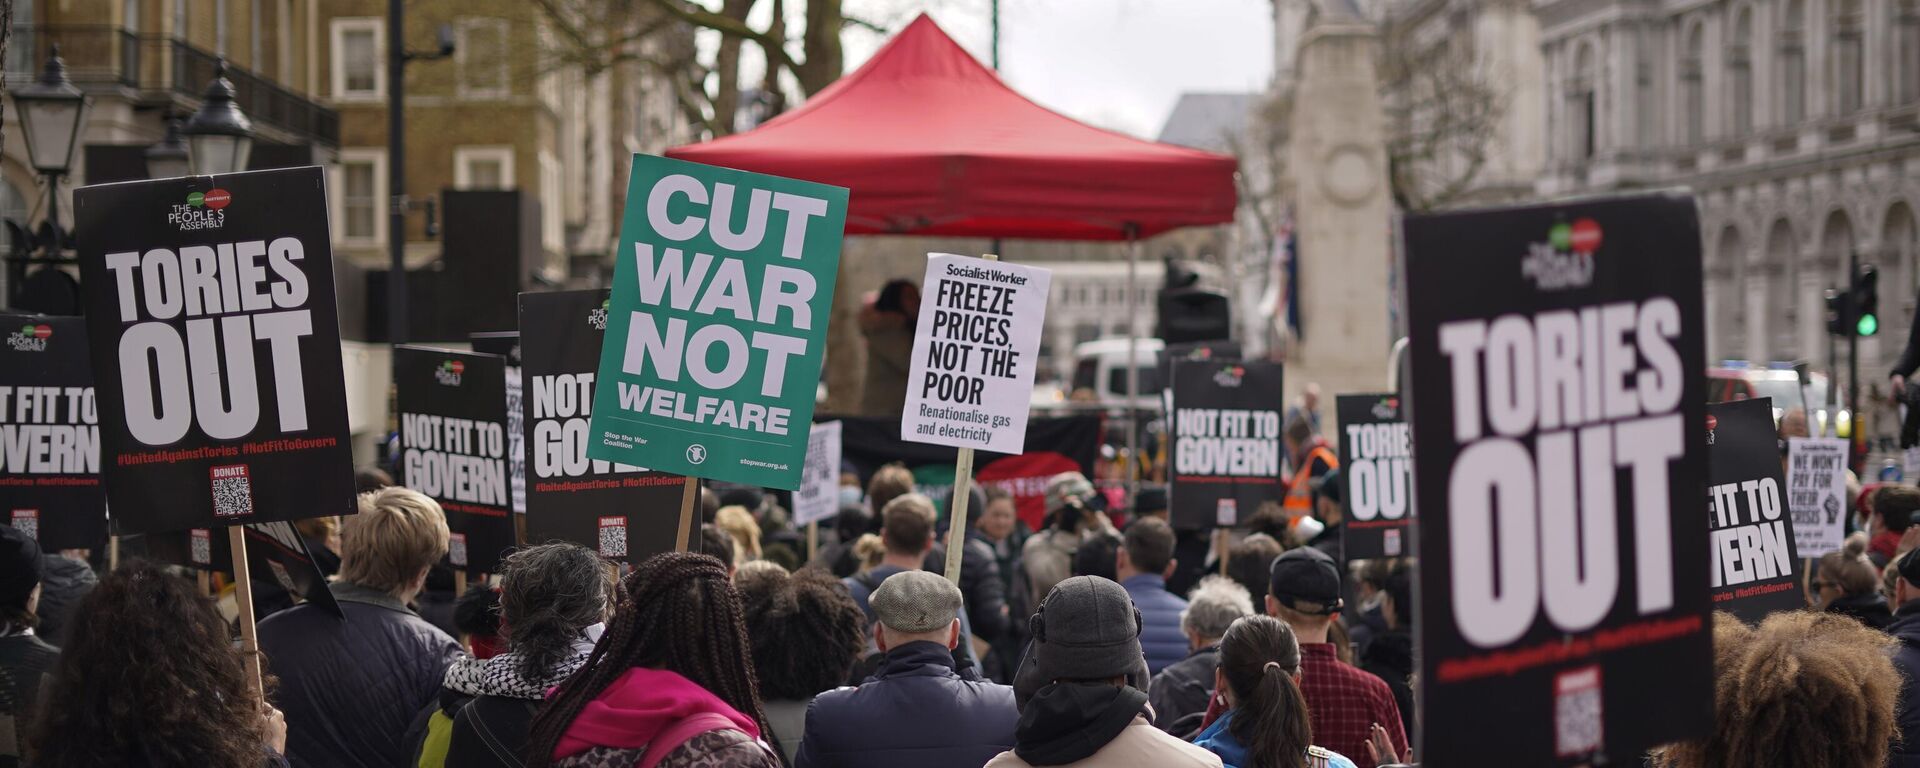 Demonstrators hold placards as they attend a protest, outside the gates of Downing Street, against the increase of the cost of living, in London, Saturday, April 2, 2022. - Sputnik International, 1920, 18.06.2022